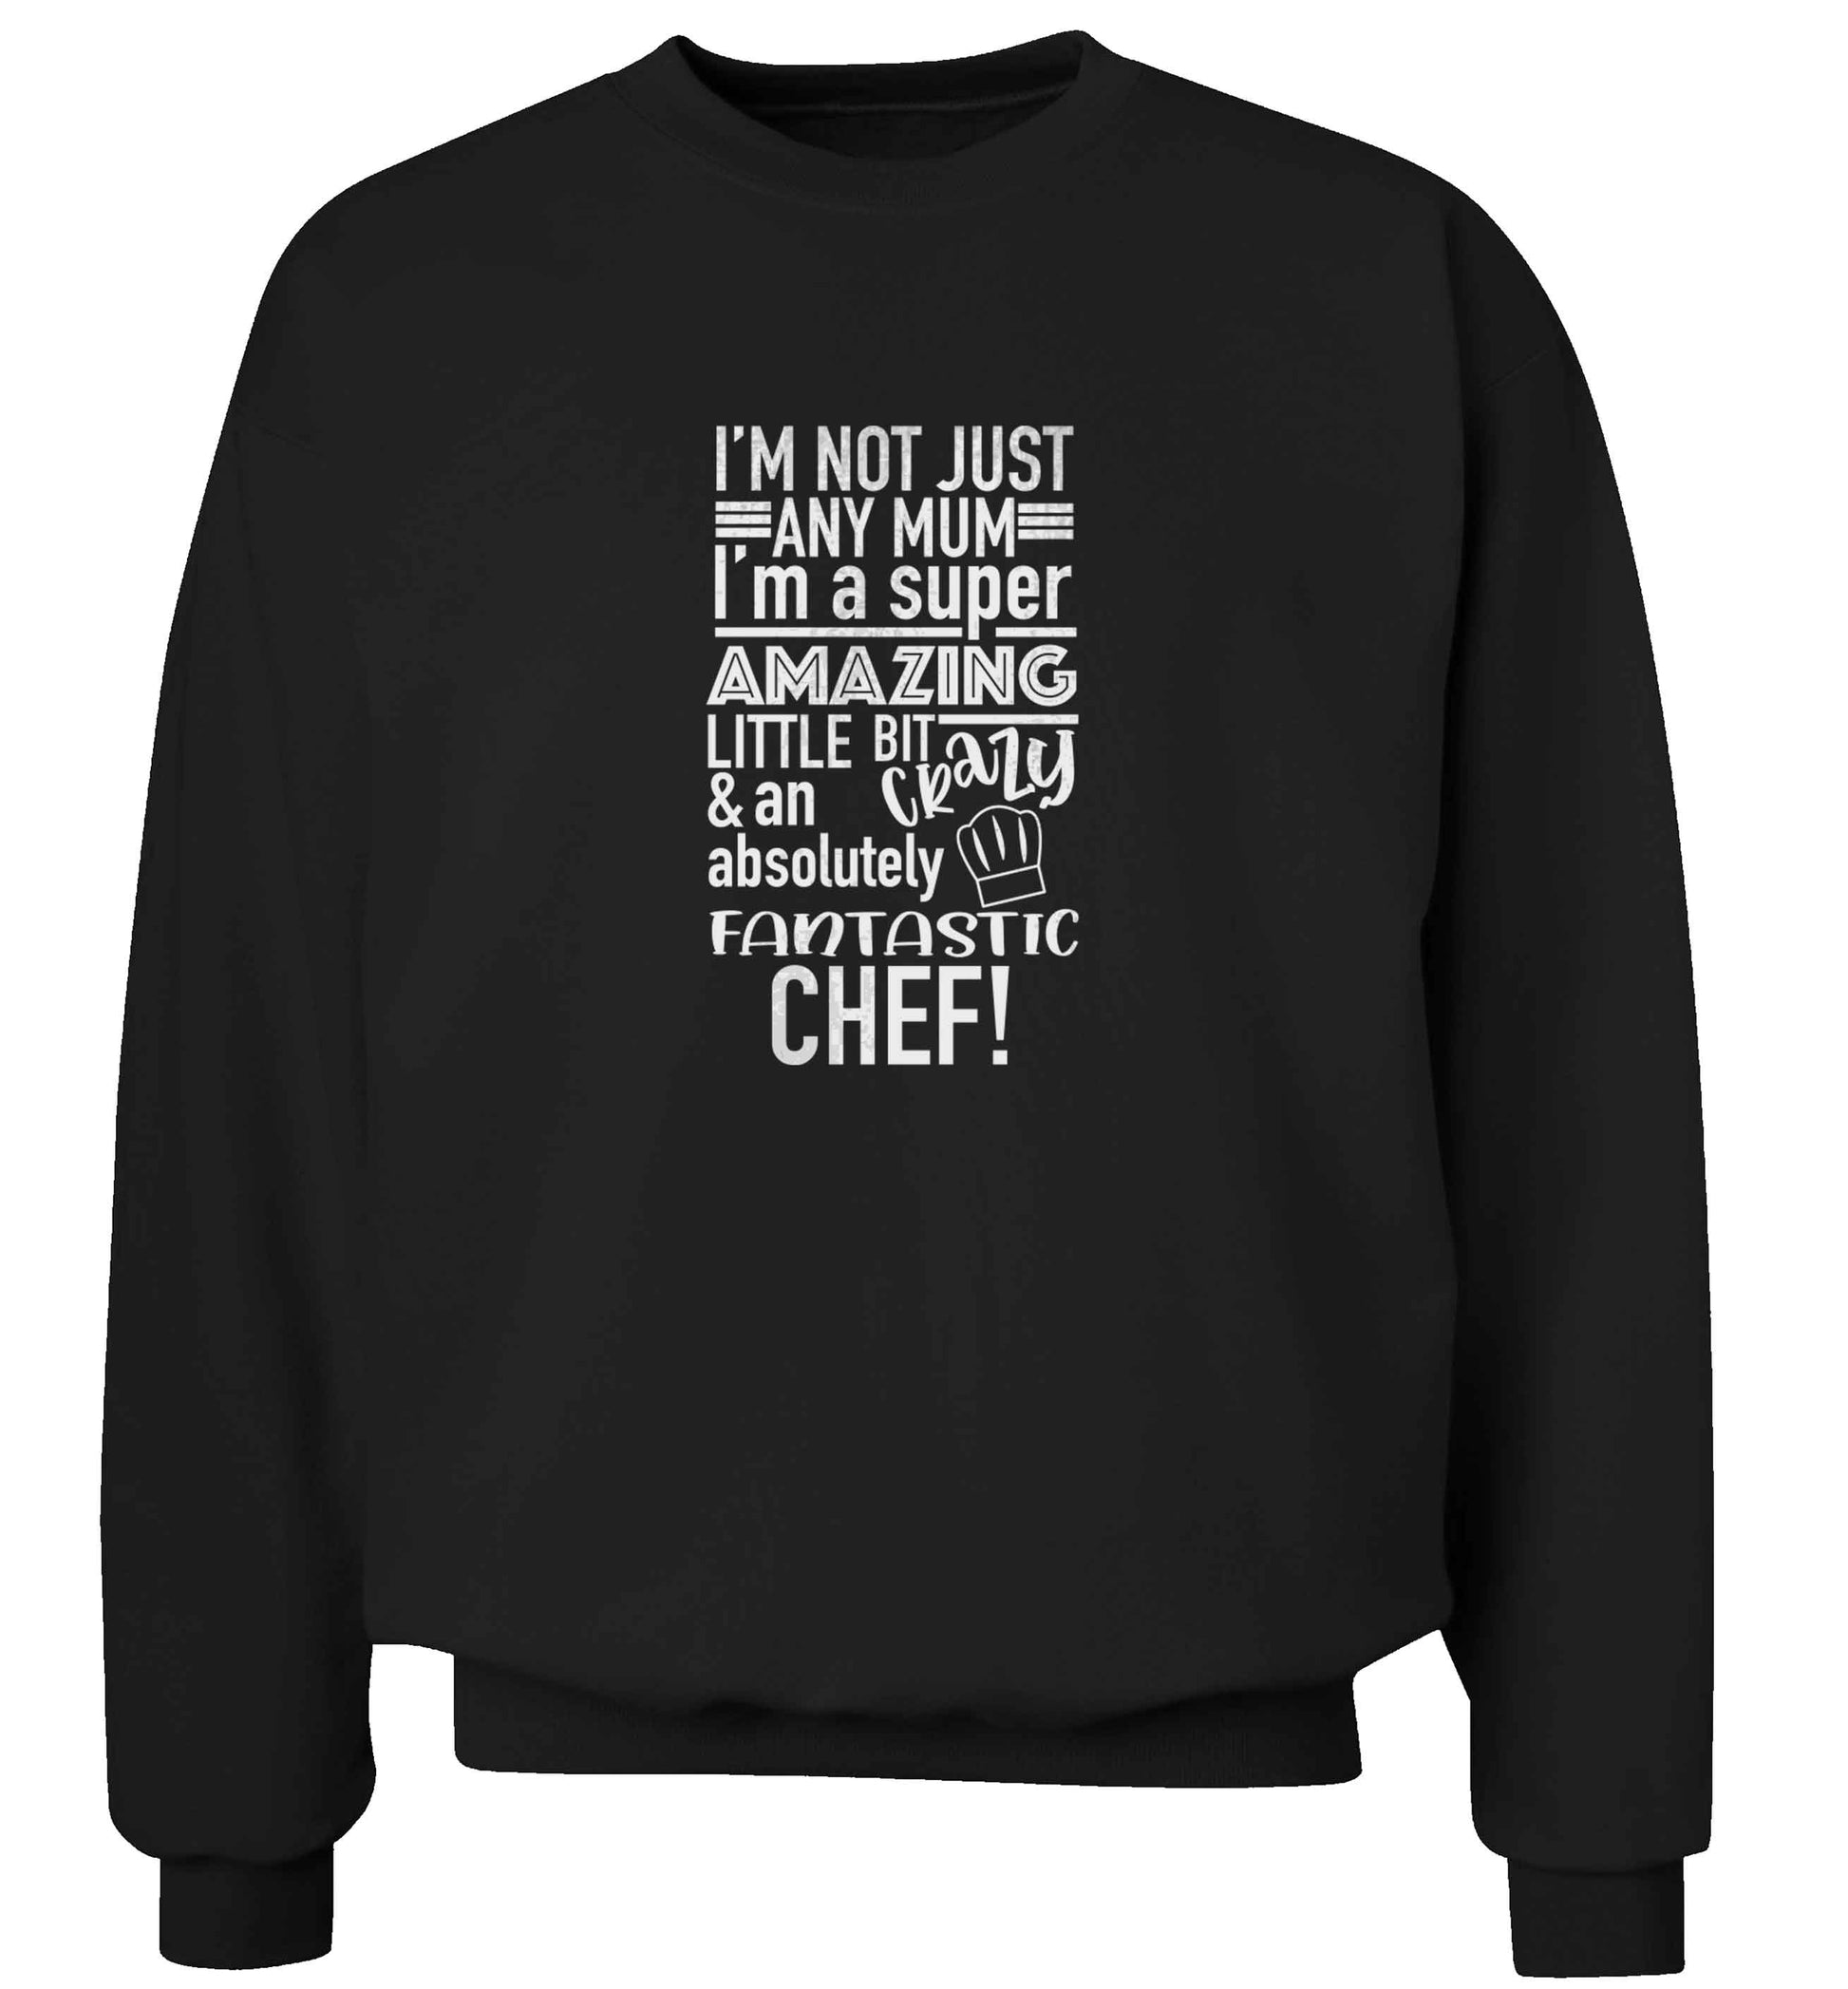 I'm not just any mum I'm a super amazing little bit crazy and an absolutely fantastic chef! adult's unisex black sweater 2XL